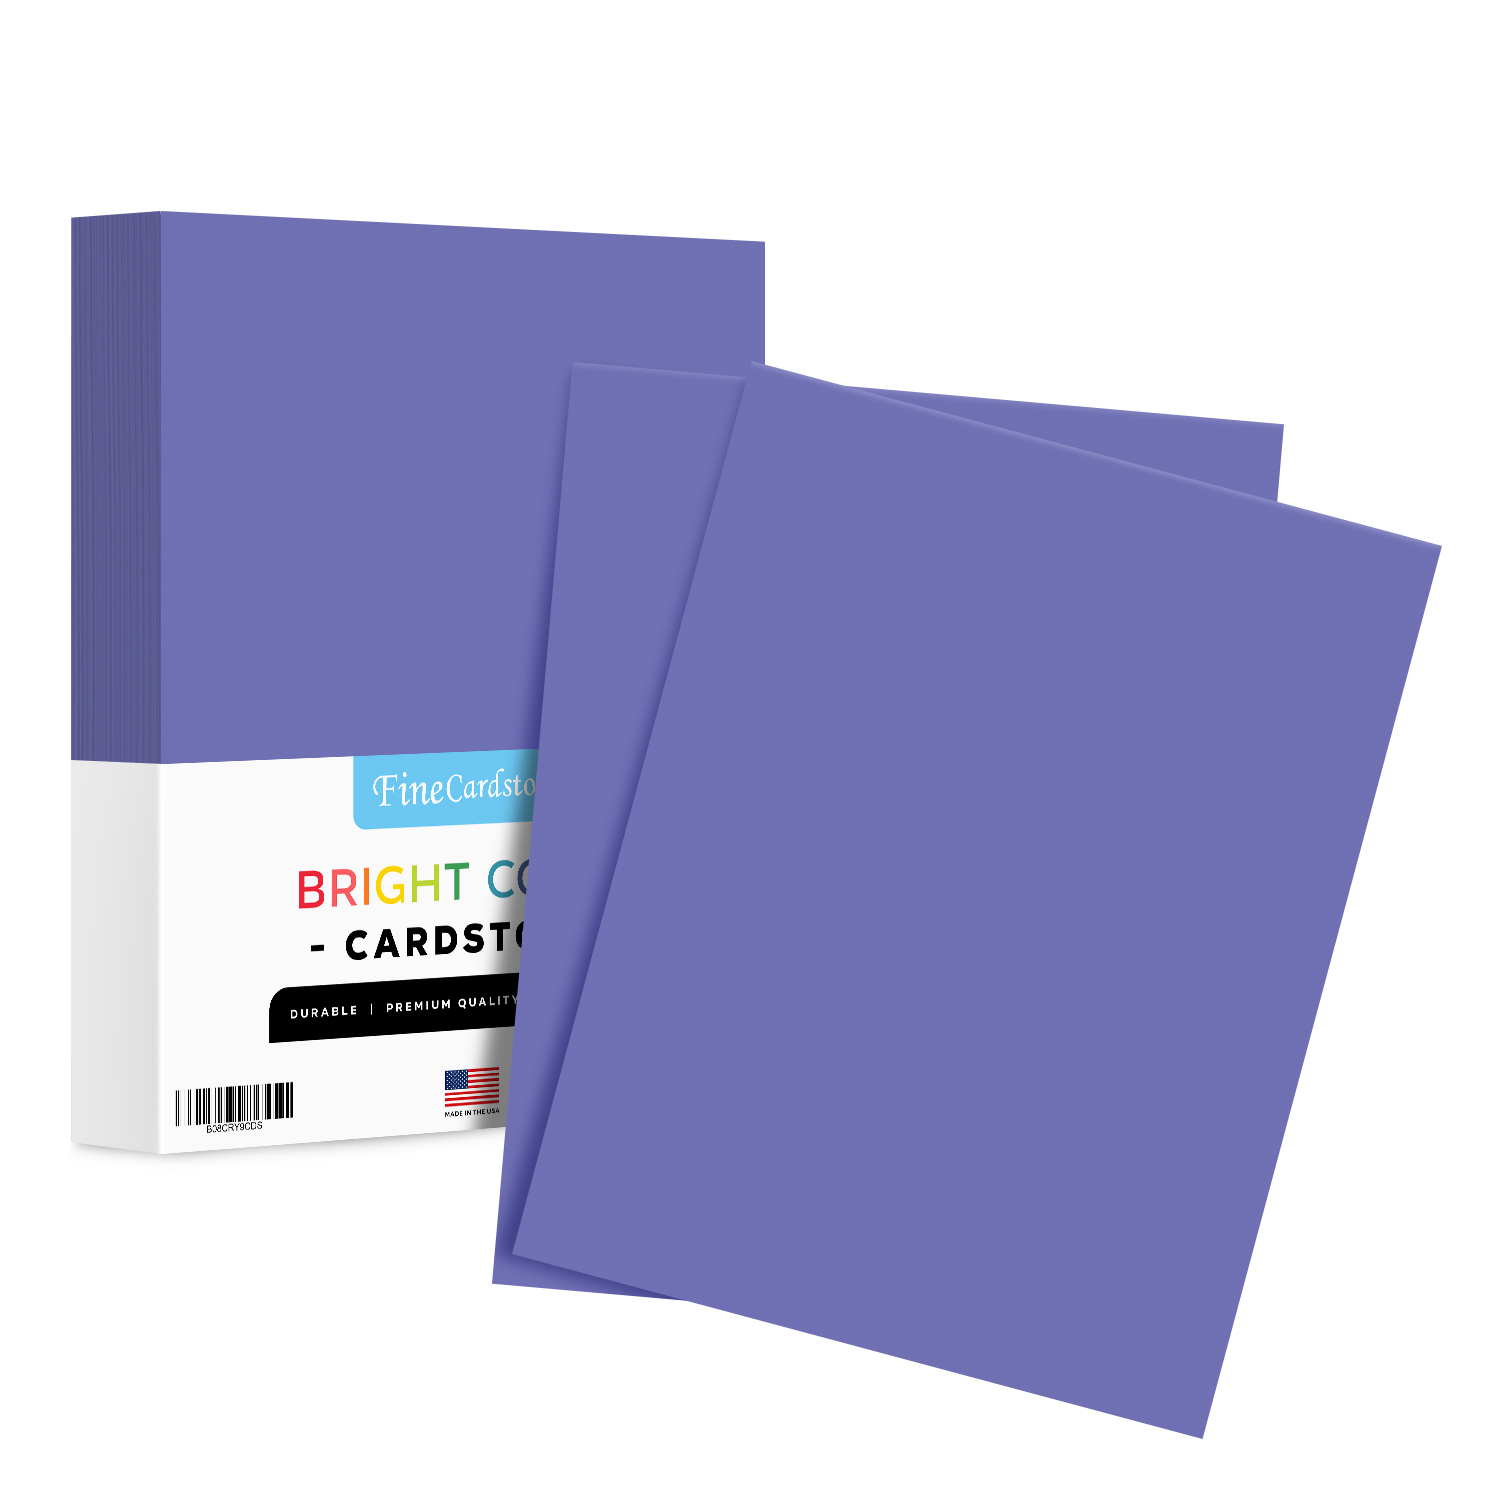 Bright Printable Smooth Paper Surface 4X4 Inches 250 Bright Purple Grape 65# Cardstock Paper 4 X 4 Small Square Card Size 65Cover//45Bond Light Weight Card Stock